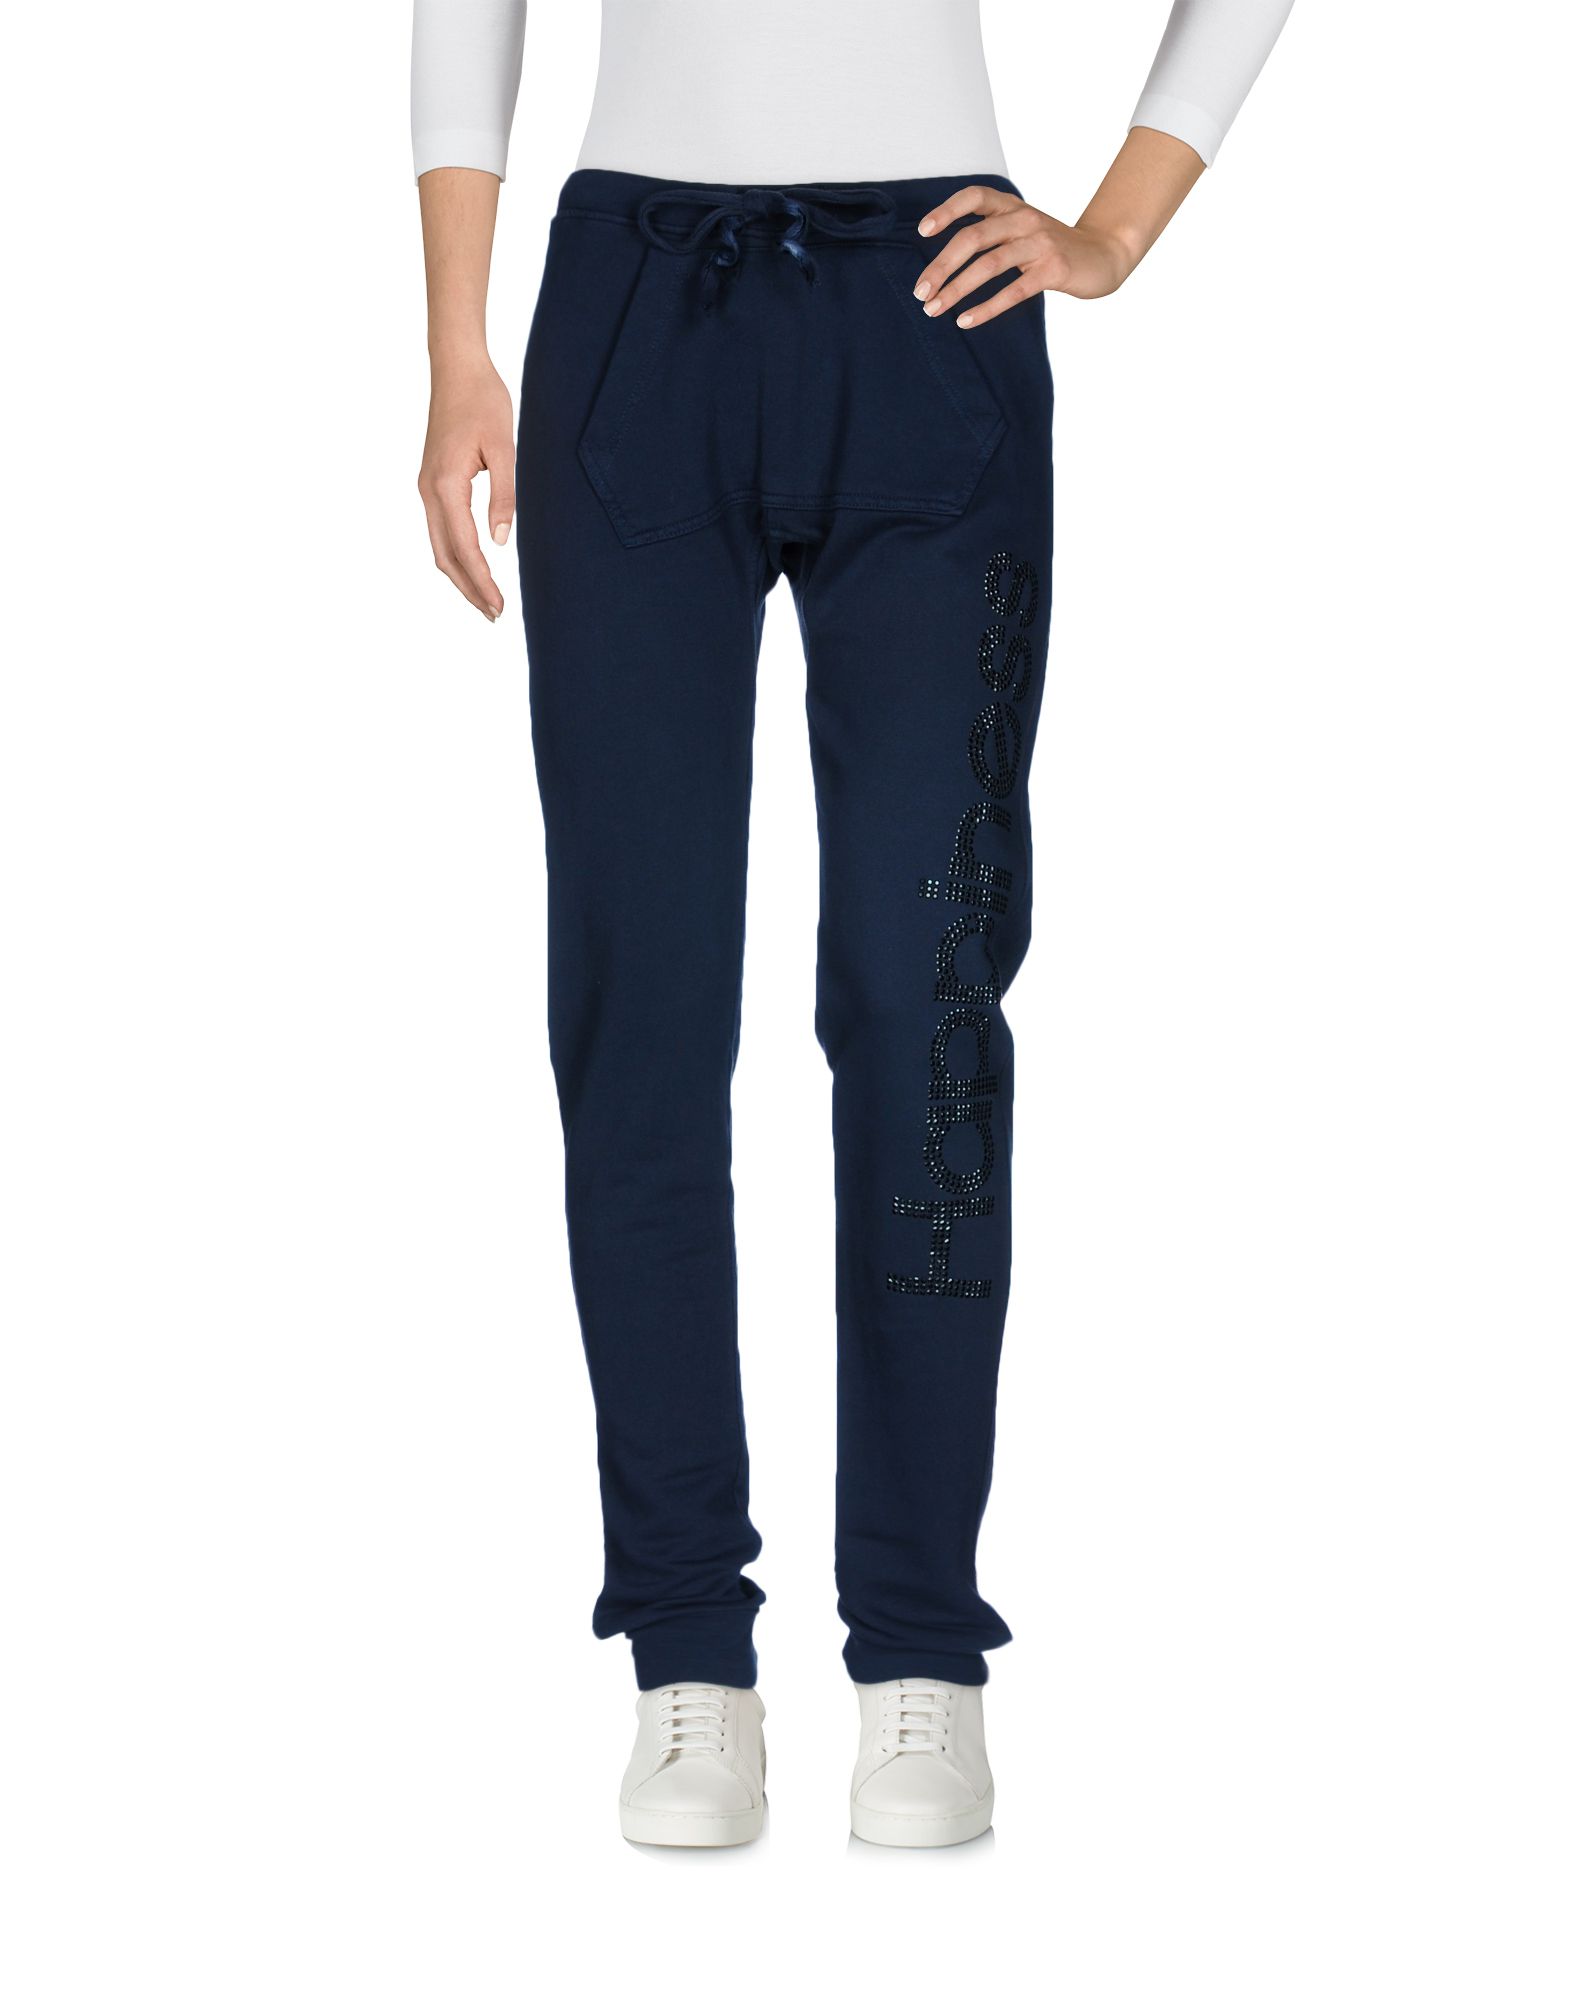 HAPPINESS Casual pants,13021405PT 6